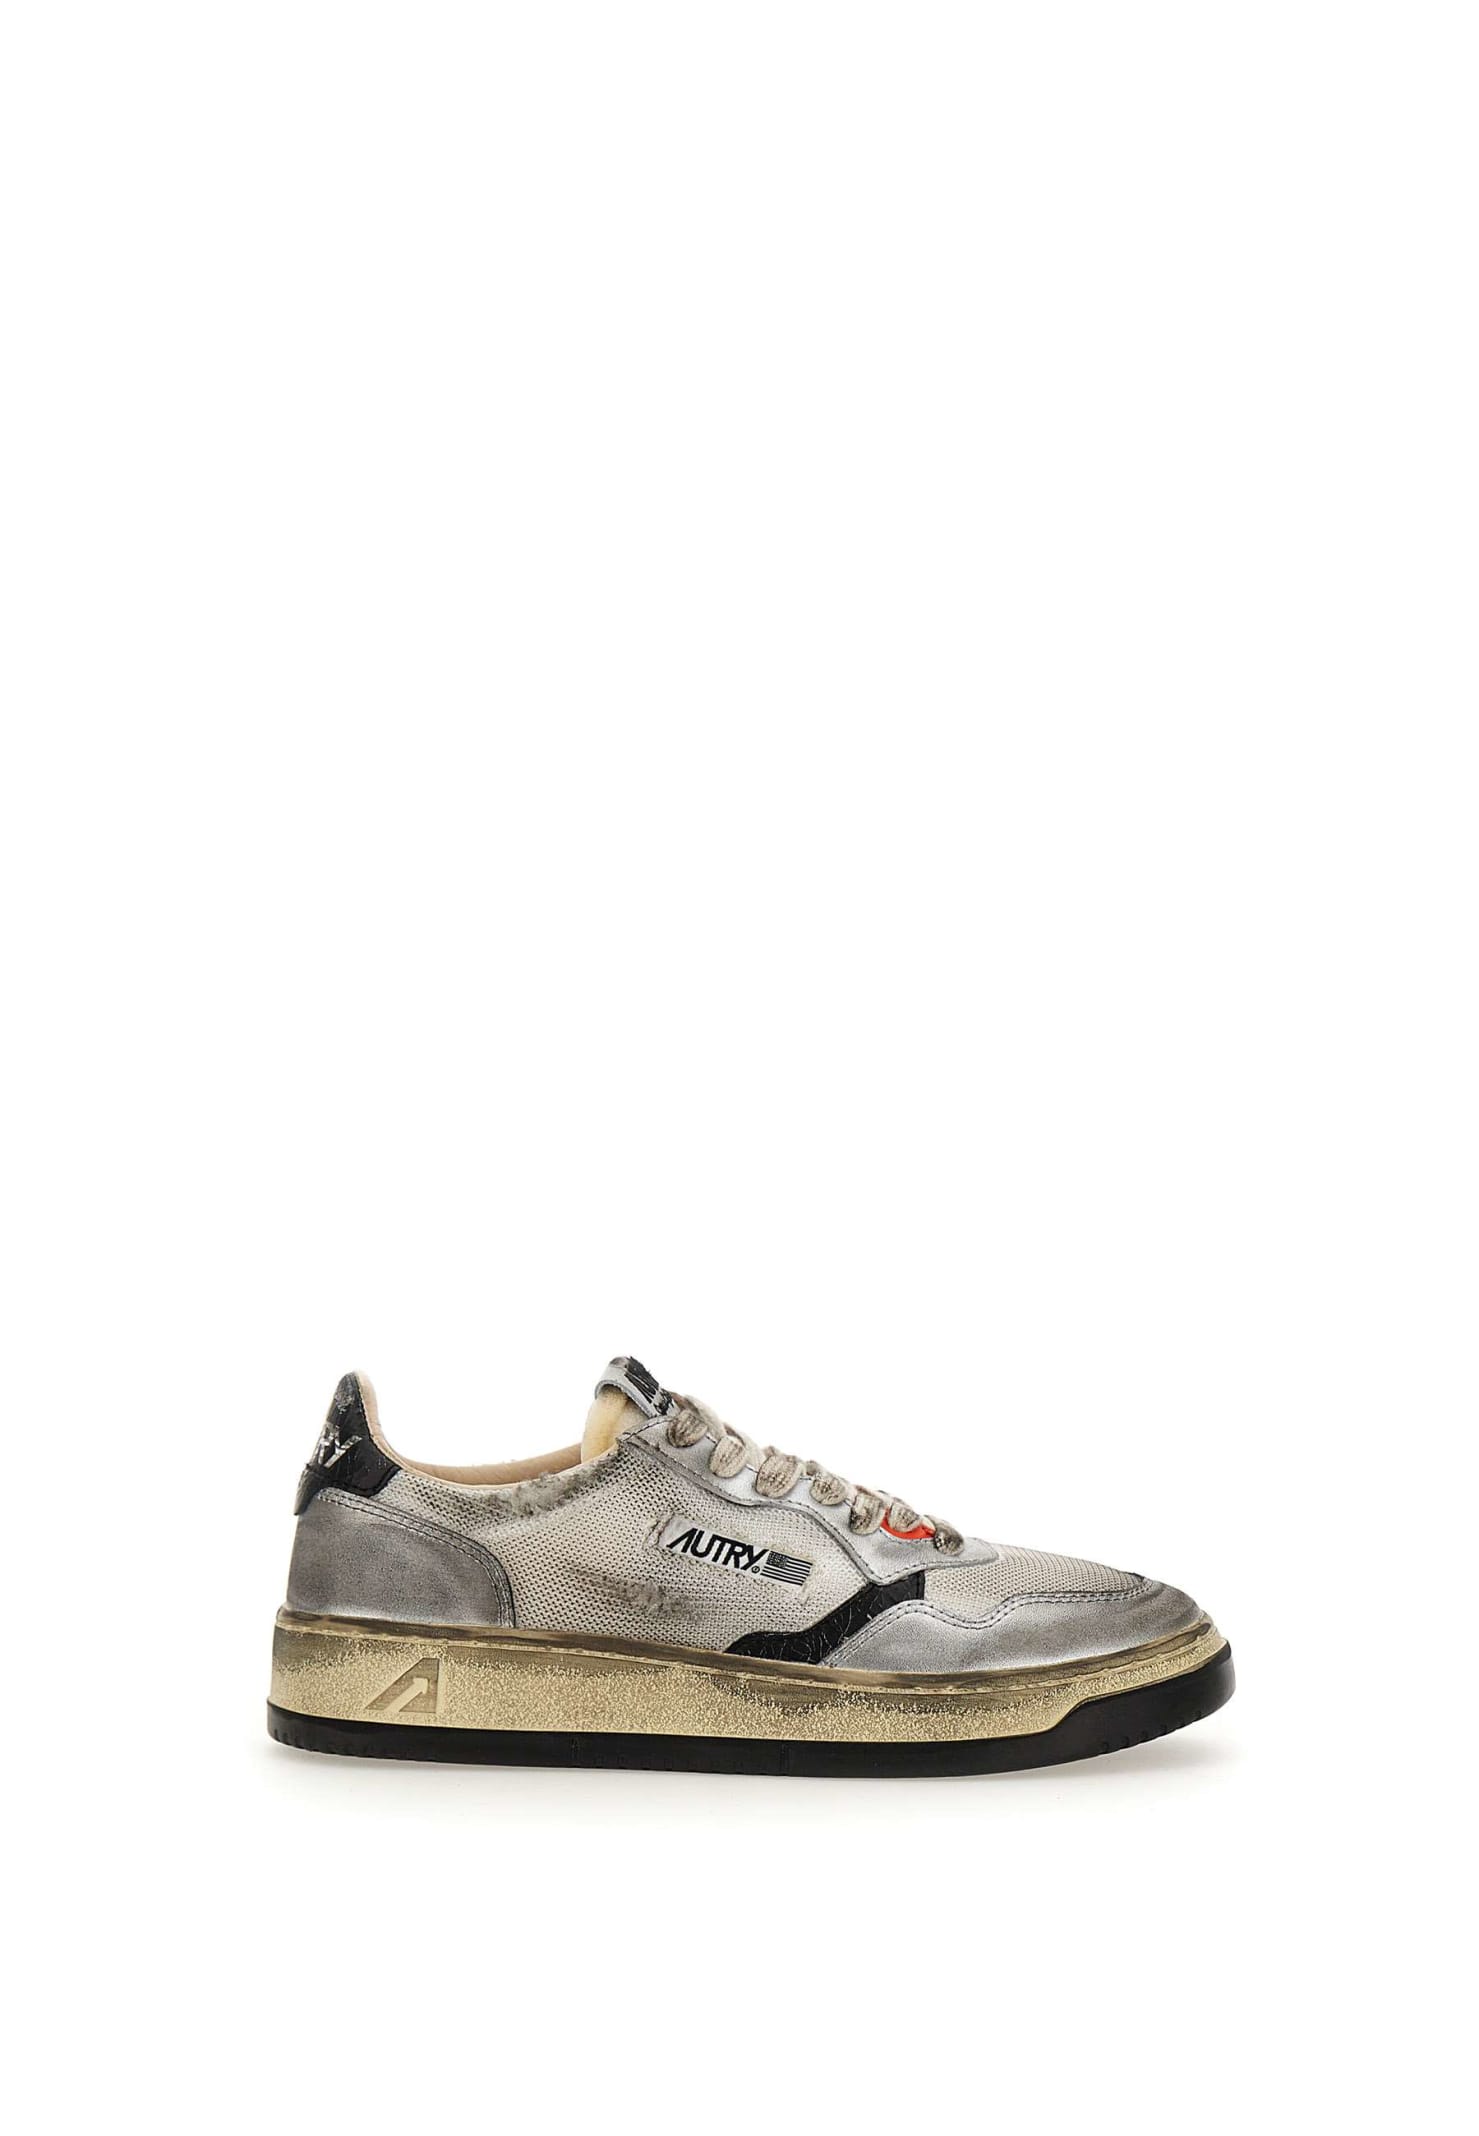 Shop Autry Avlw Ms13 Sneakers In Black/silver